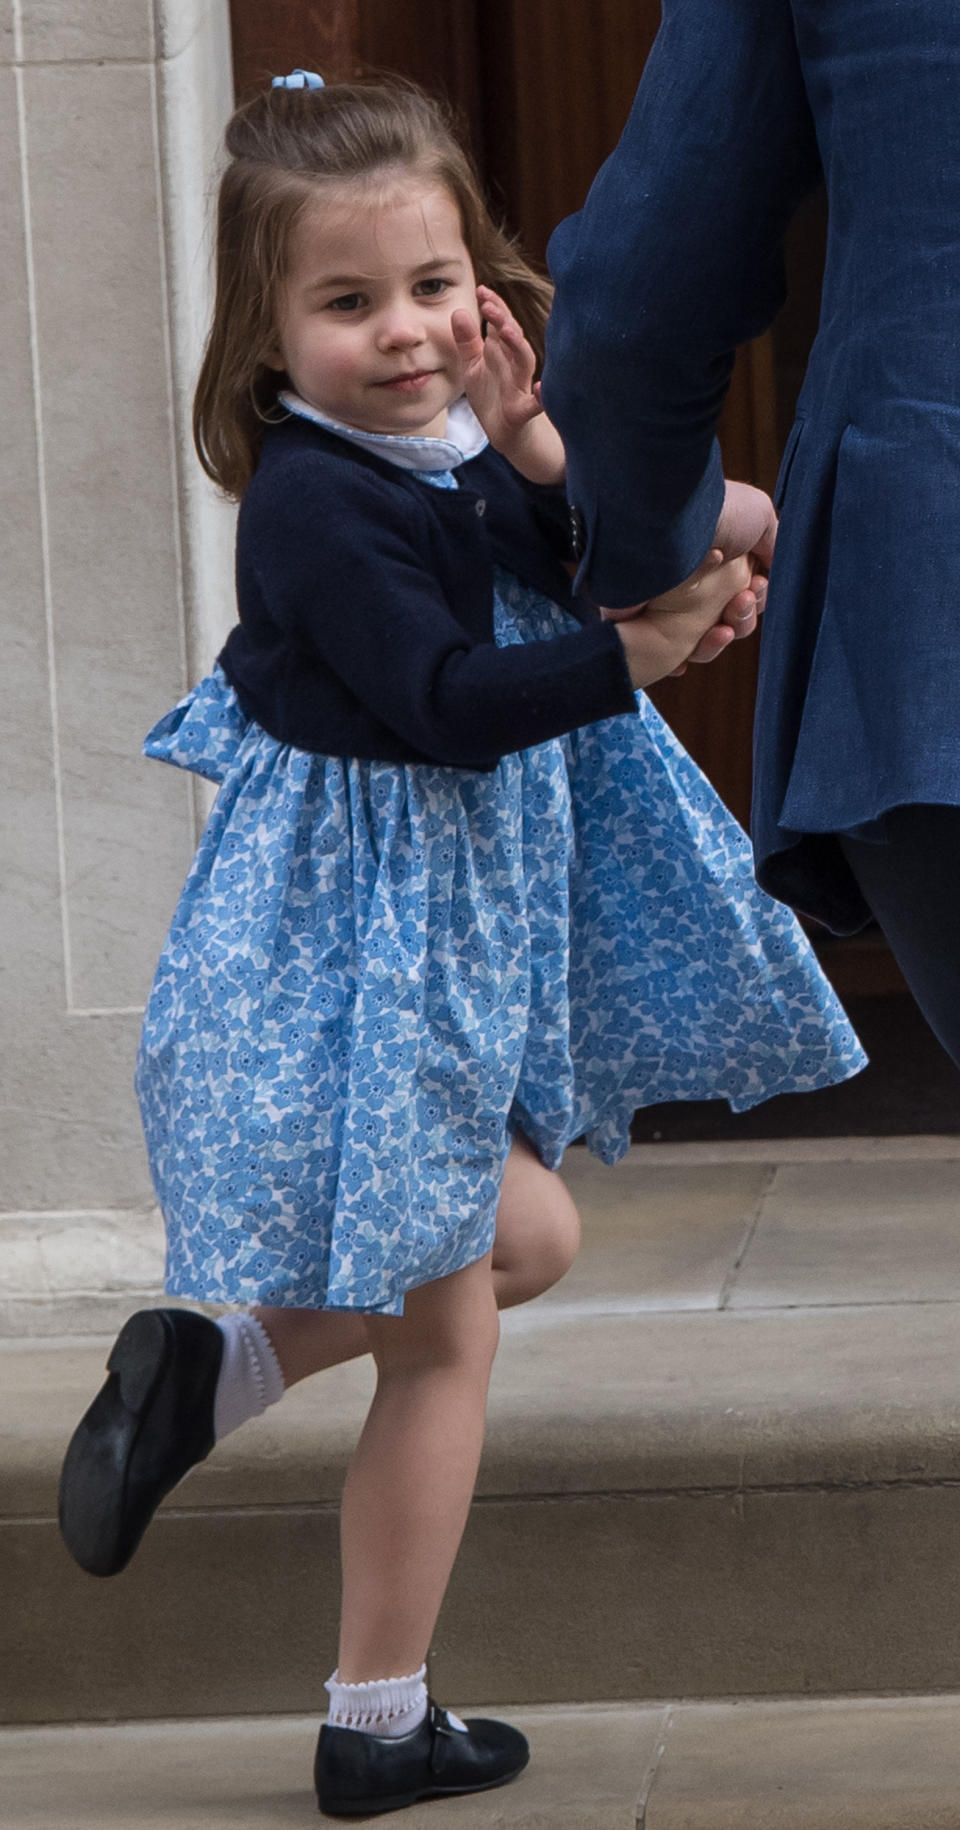 Princess Charlotte meets her brother